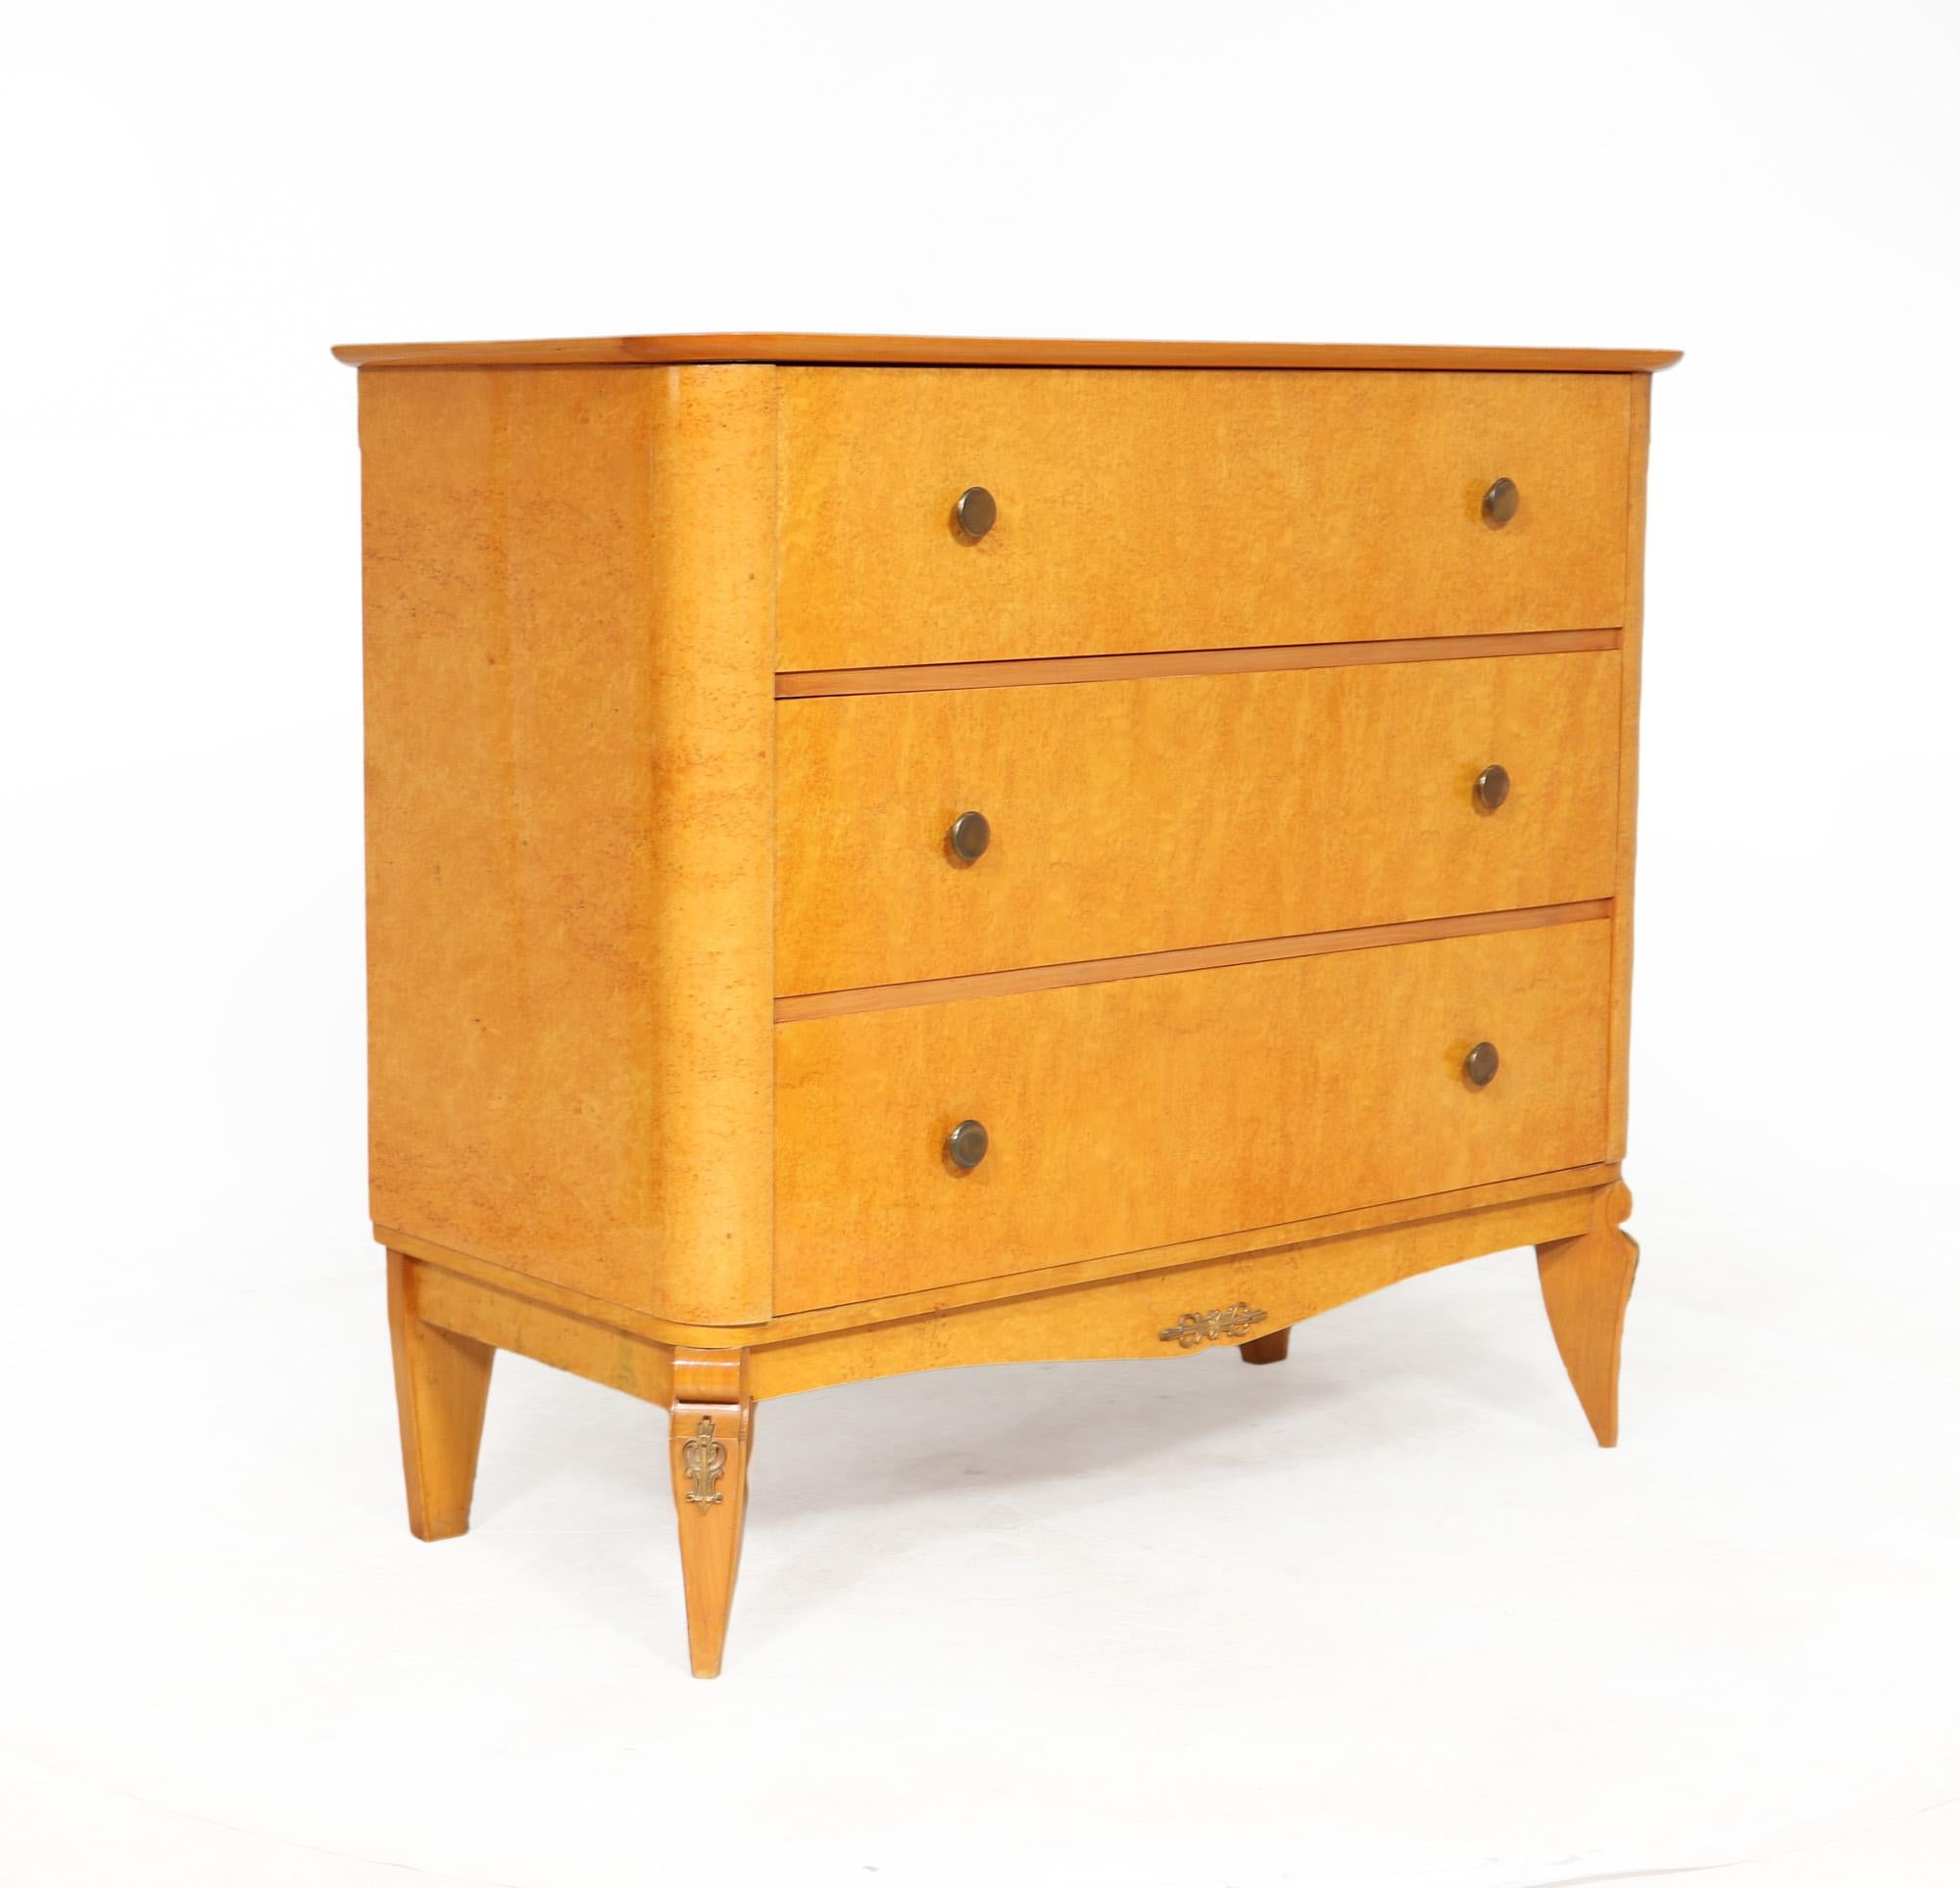 A very stylish vintage chest of drawers produced in France in the 1960’s using Karelian birch, having three long drawers with dovetail joint construction and gold printed handles, encased in a strong formed carcass with rounded Corners and standing